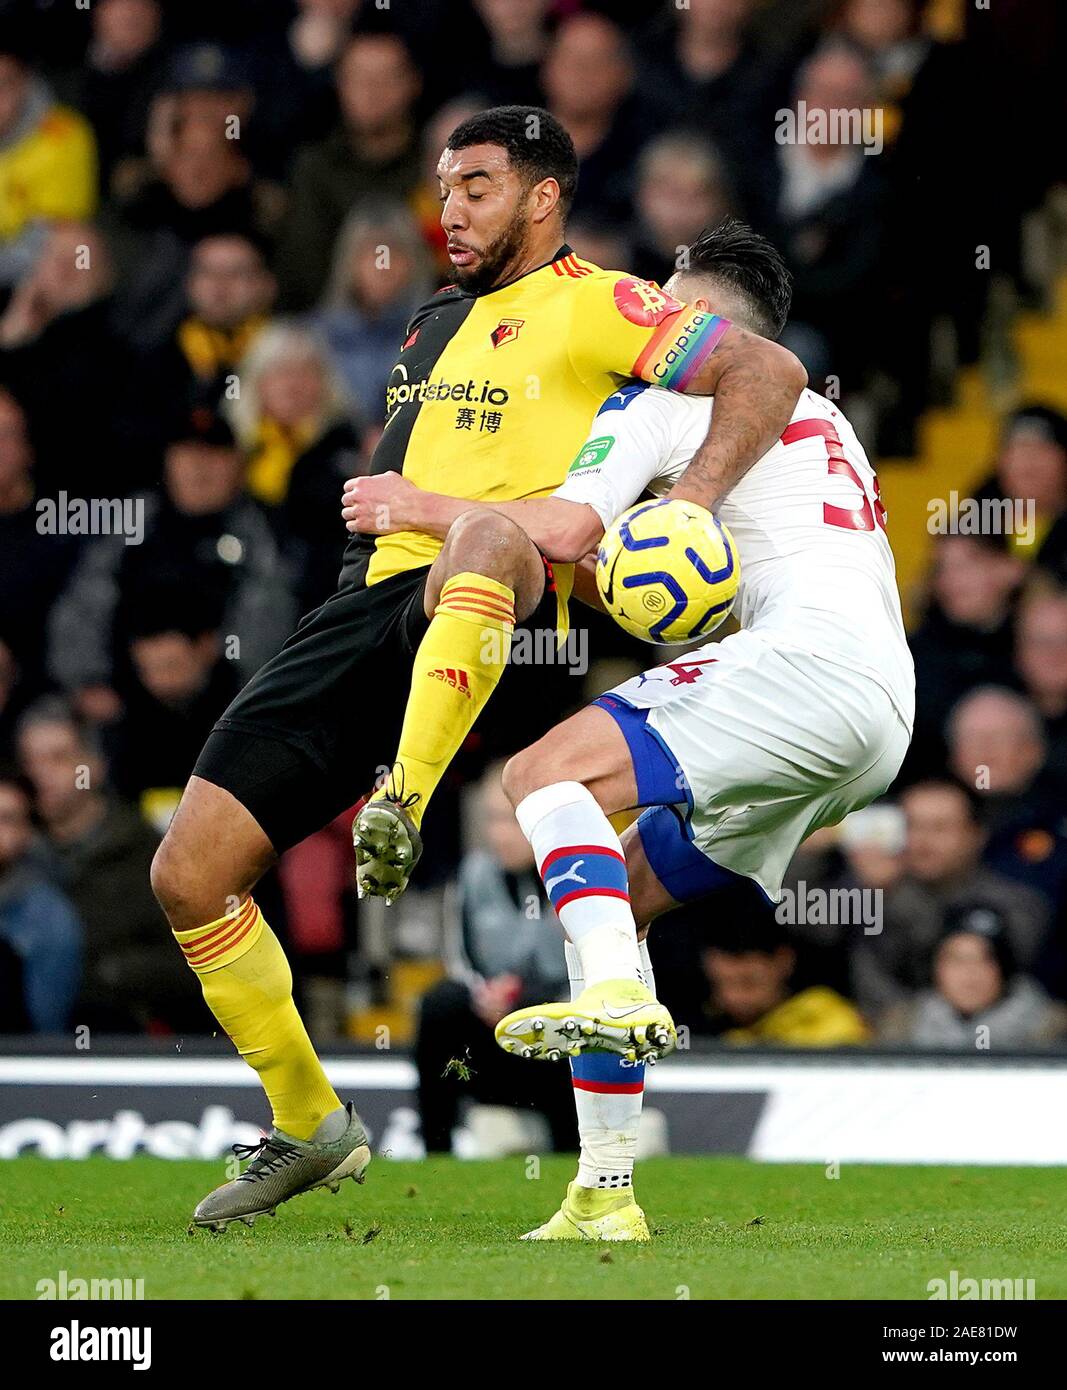 Watford's Troy Deeney and Crystal Palace's Martin Kelly (right) battle for the ball during the Premier League match at Vicarage Road, Watford. Stock Photo